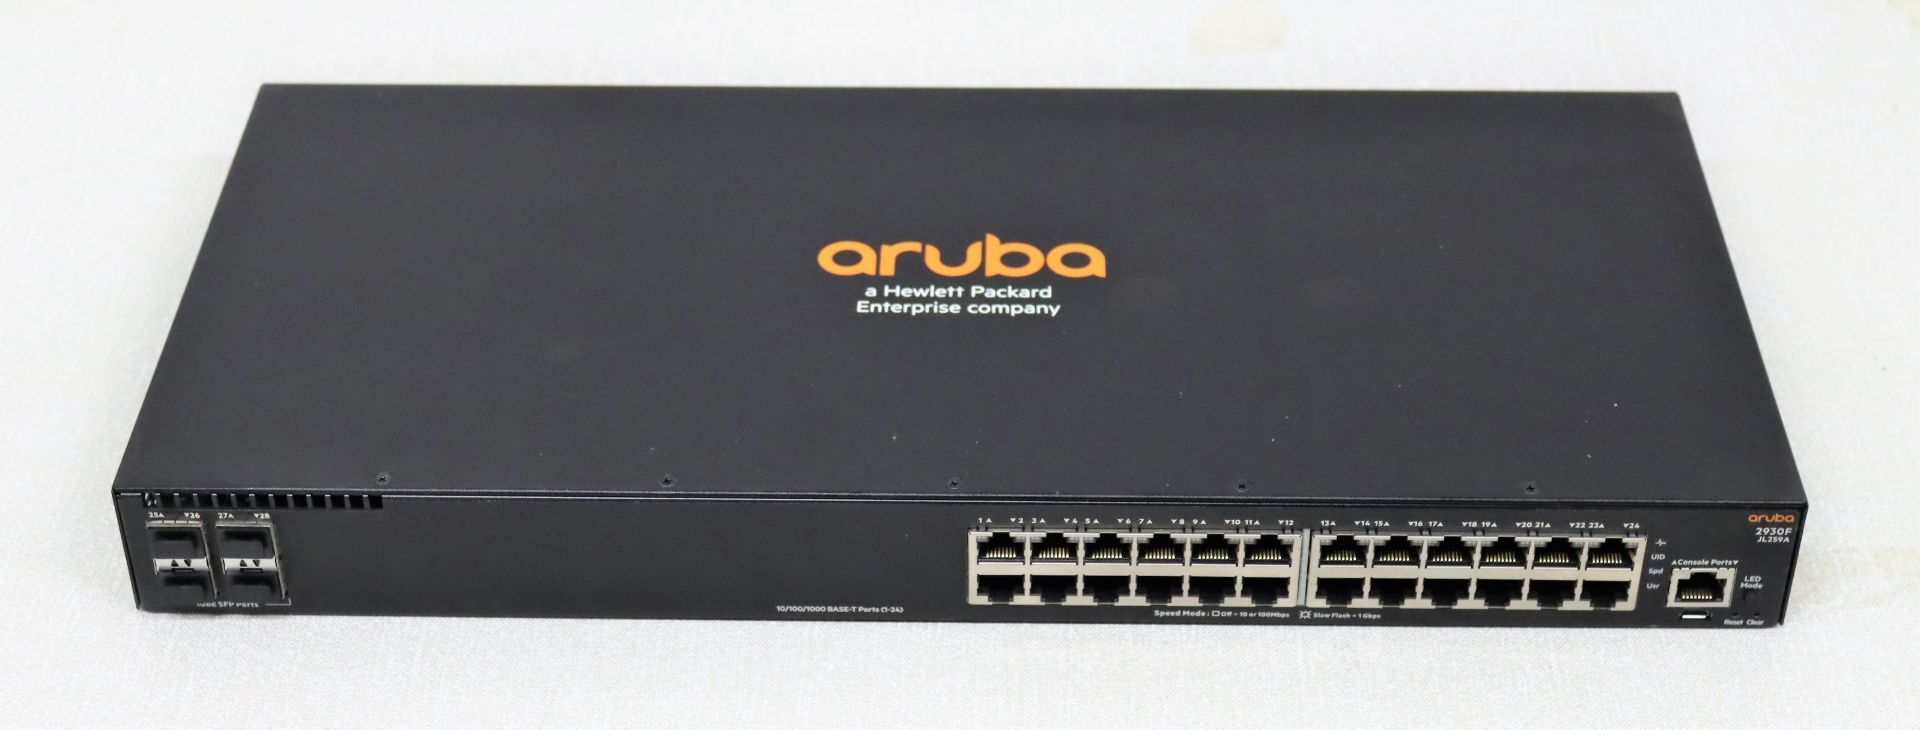 Two pre-owned HP Aruba 2930F (JL259A) 24-Port managed switches in black.